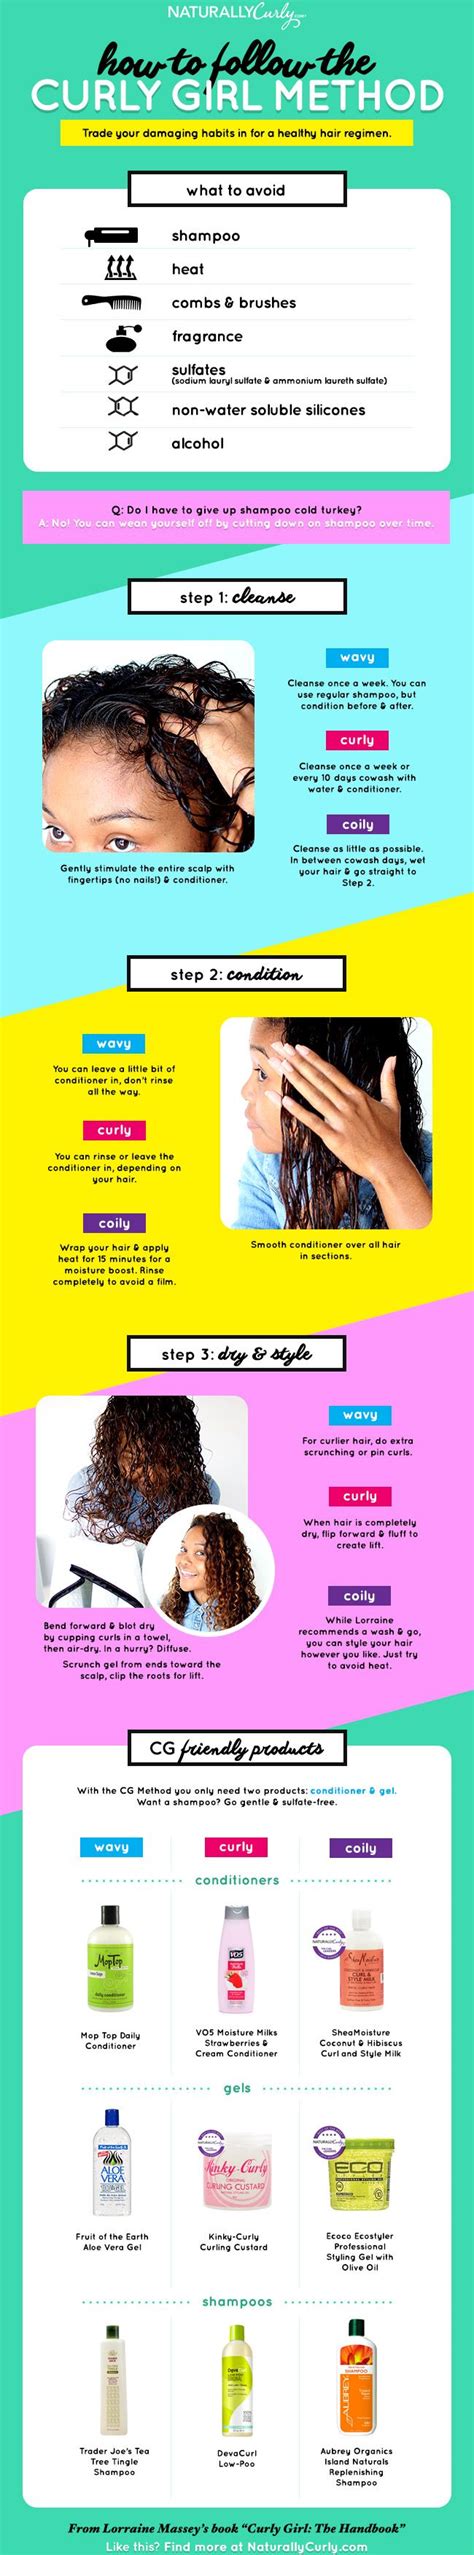 How To Follow The Curly Girl Method